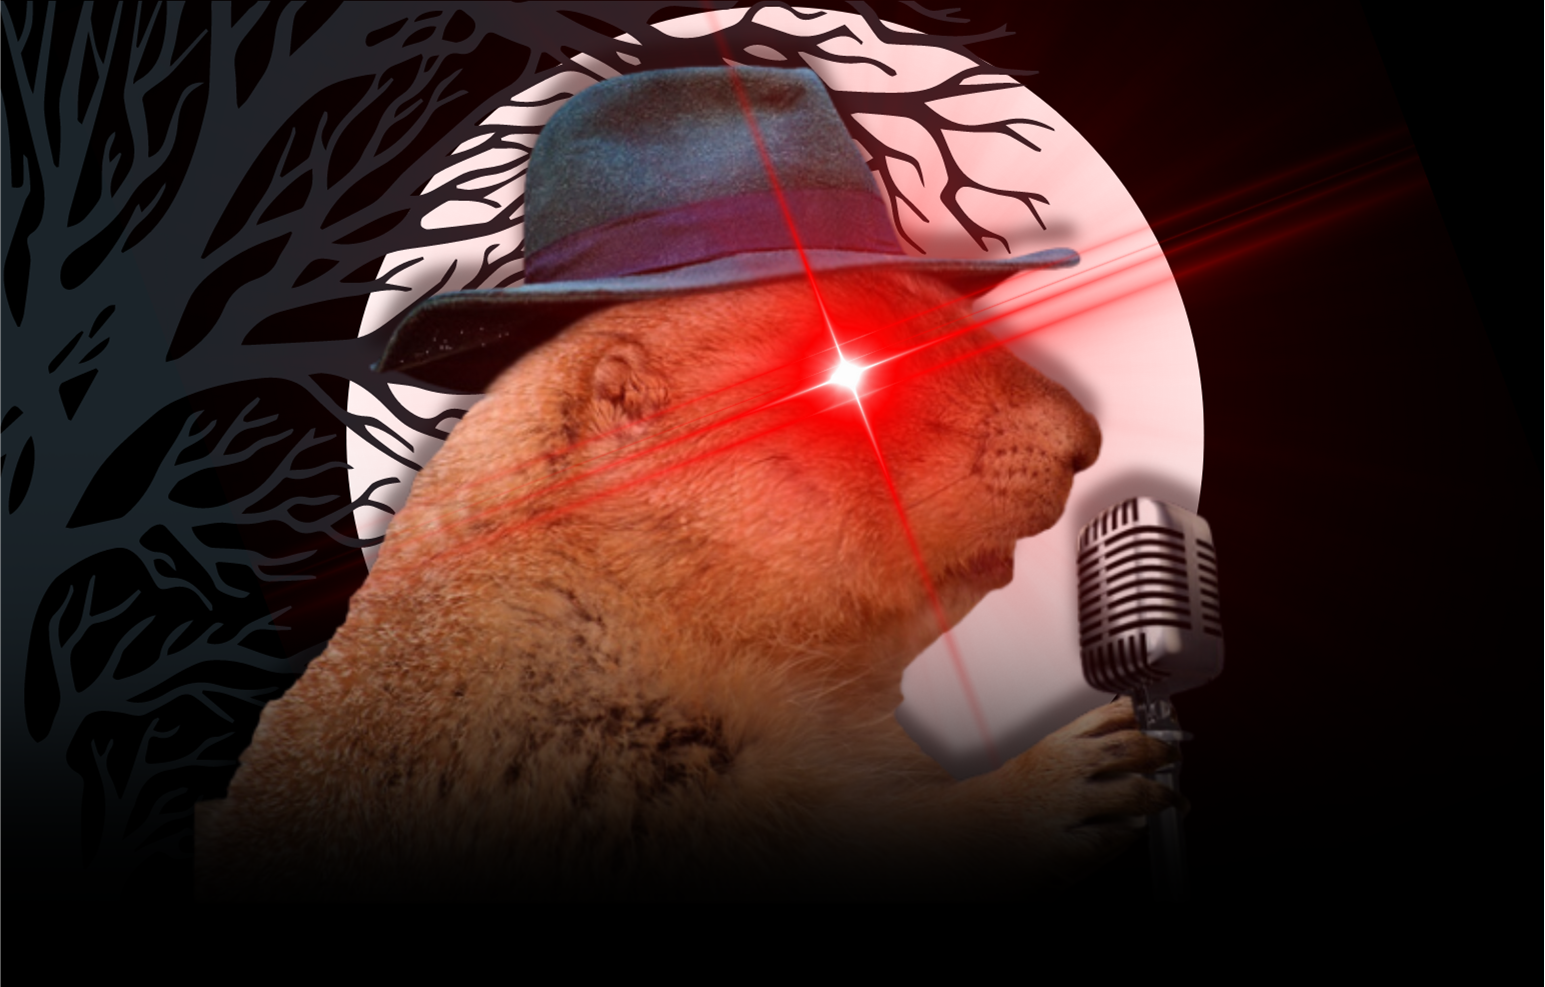 A prairie dog holds a microphone and wears a fedora in front of a spooky tree and a full moon. His eyes shine with an ominous red glow.